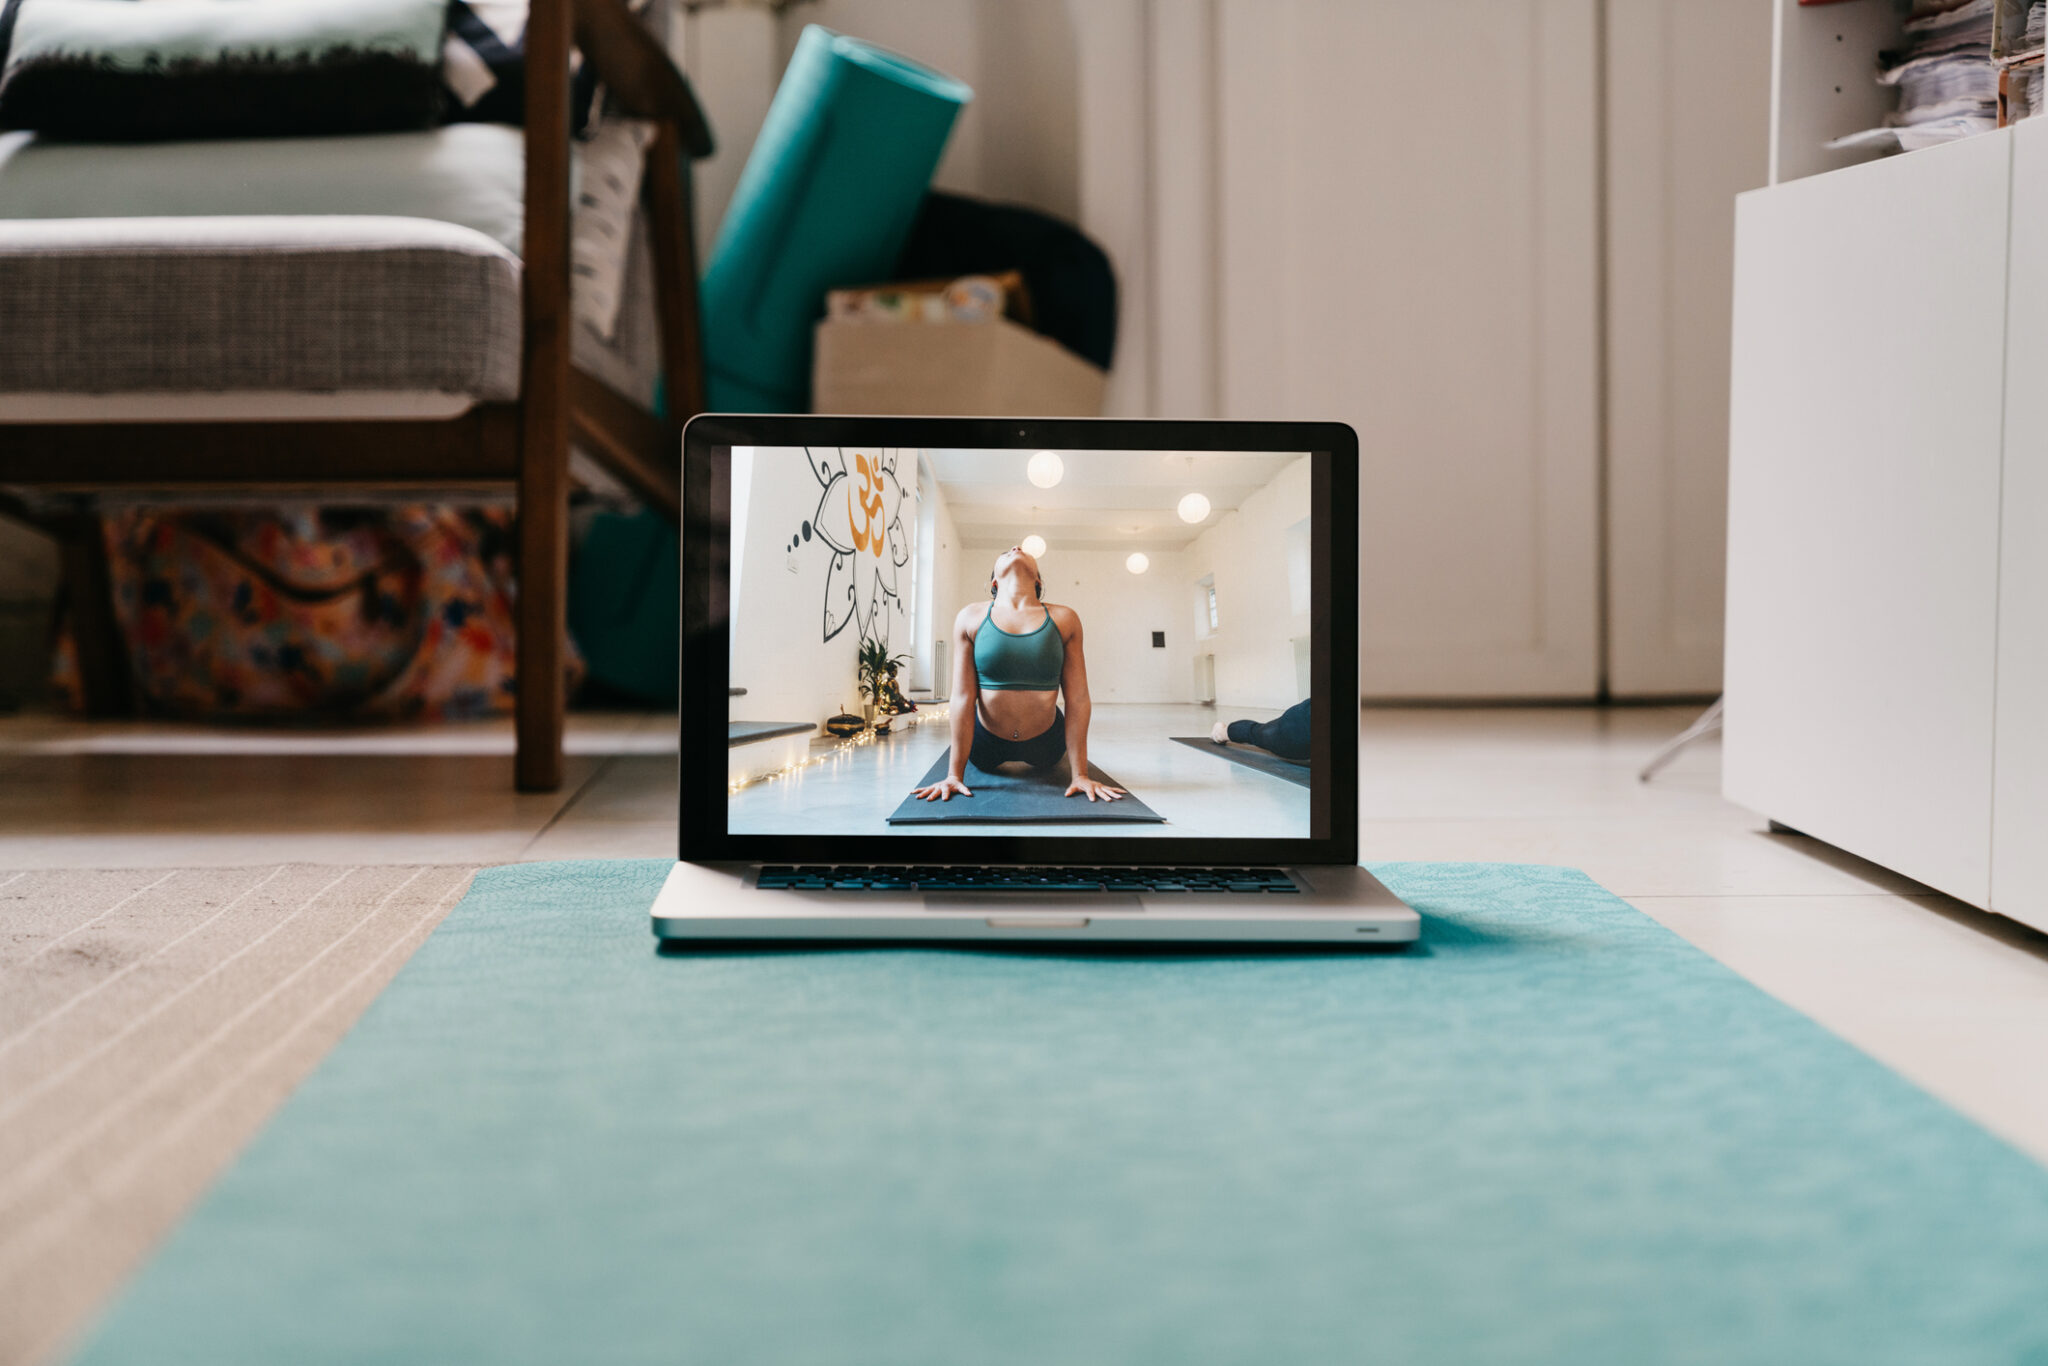 The laptop is ready for an online yoga video lesson. During Coronavirus Covid-19 quarantine, many people is practicing sport at home.